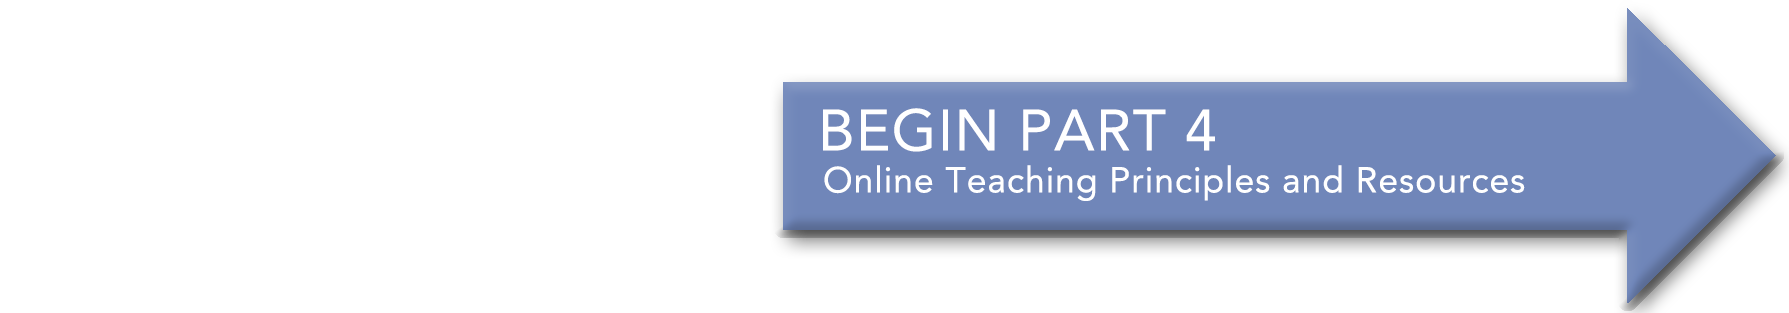 Begin Part 4, Online Teaching Principles and resources